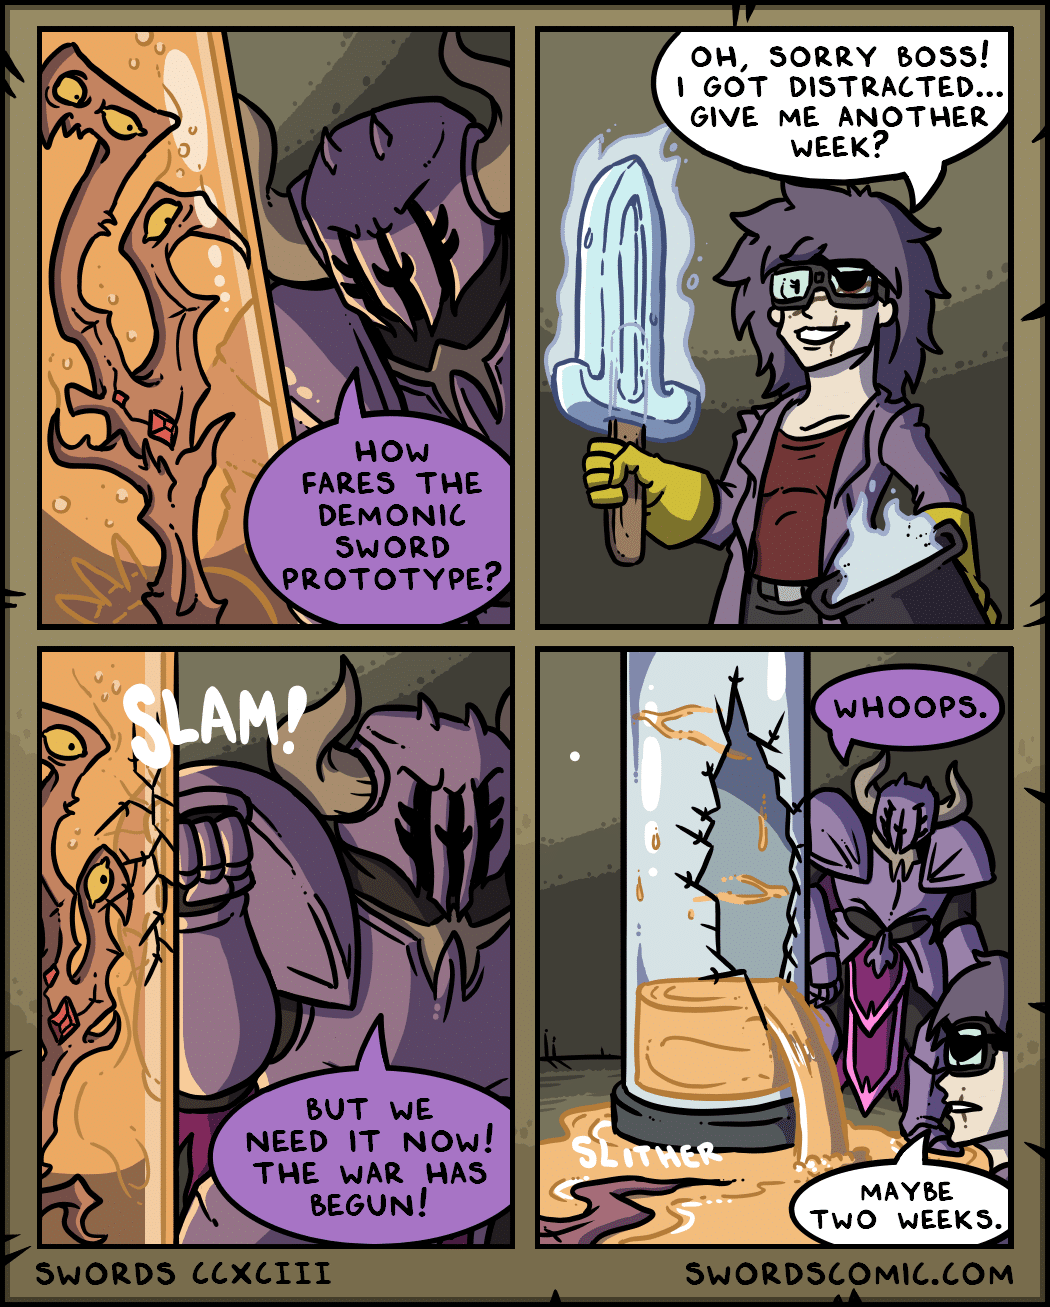 comics comics comics text: HOW FARES THE DEMONIC SWORD PROTOTYPE? BUT WE NEED IT NOW! THE WAR HAS BEGUN! SWORDS ccxclll OH, SORRY boss! I GOT DISTRACTED... GIVE ME ANOTHER WEEK? WHOOPS. MAYBE Two WEEKS. SWORDSCOMIC.COM 